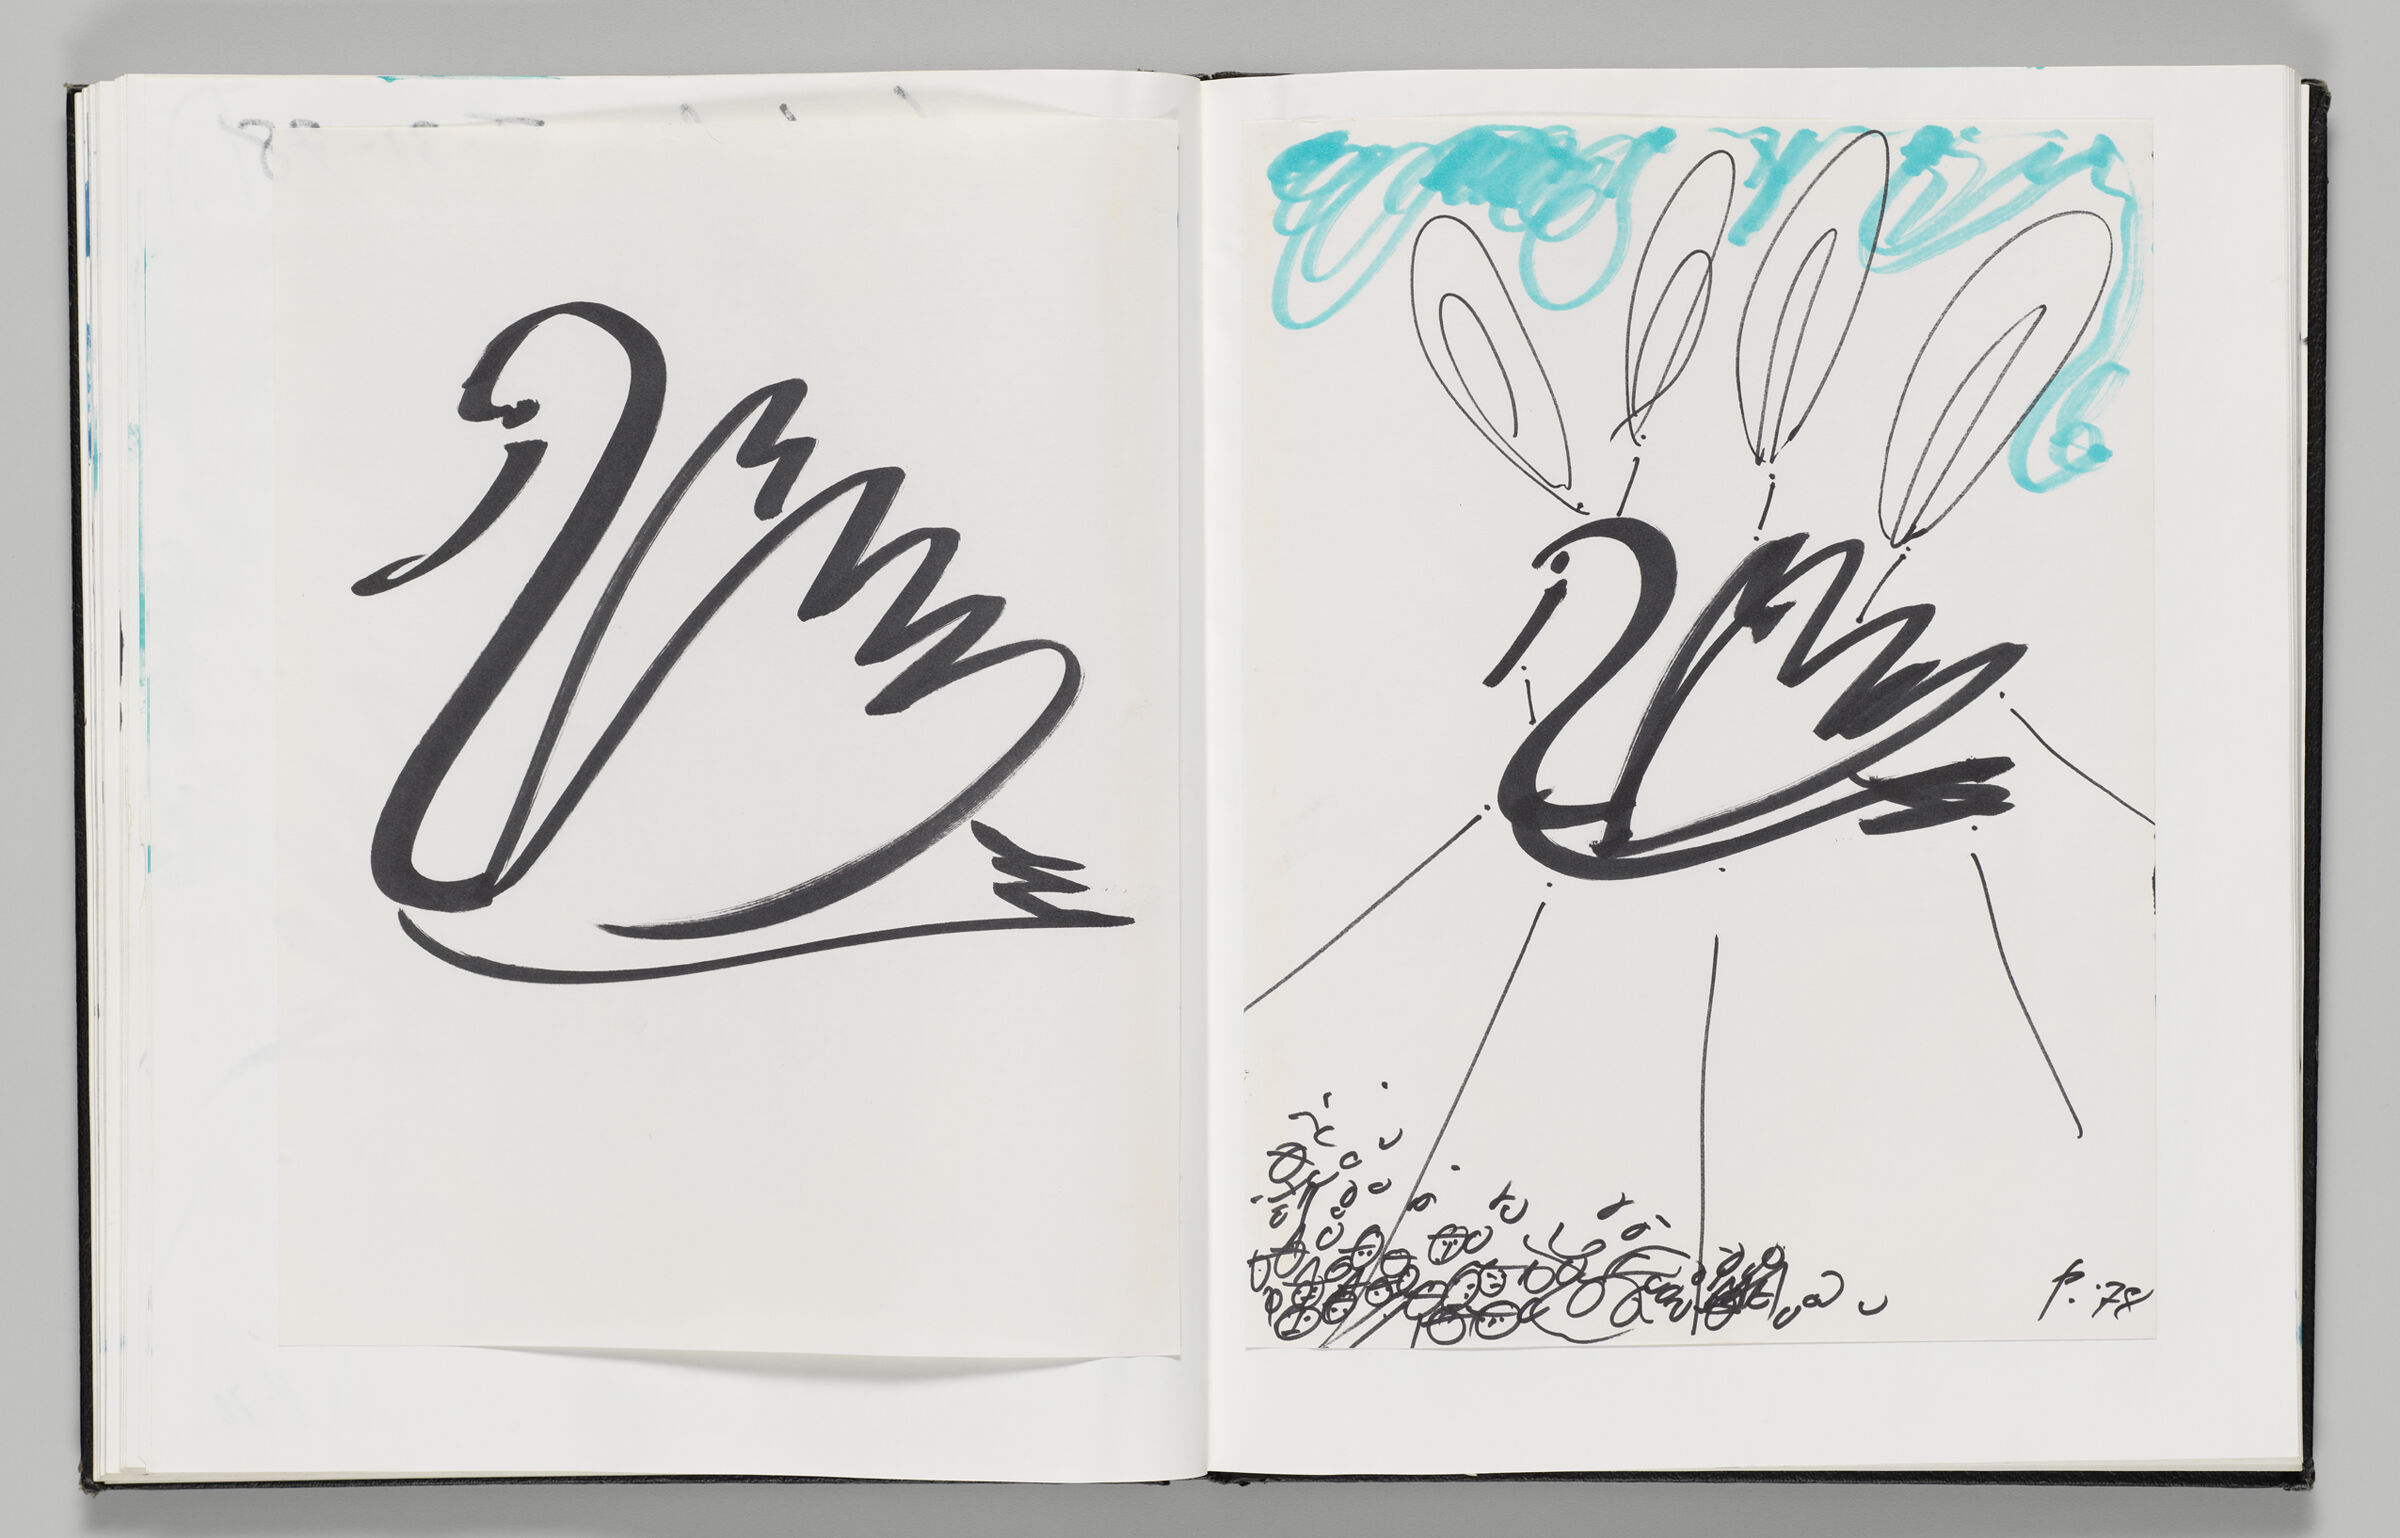 Untitled (Adhered Sketch Of Swan Inflatable, Left Page); Untitled (Adhered Sketch Of Swan Inflatable With Crowd, Right Page)